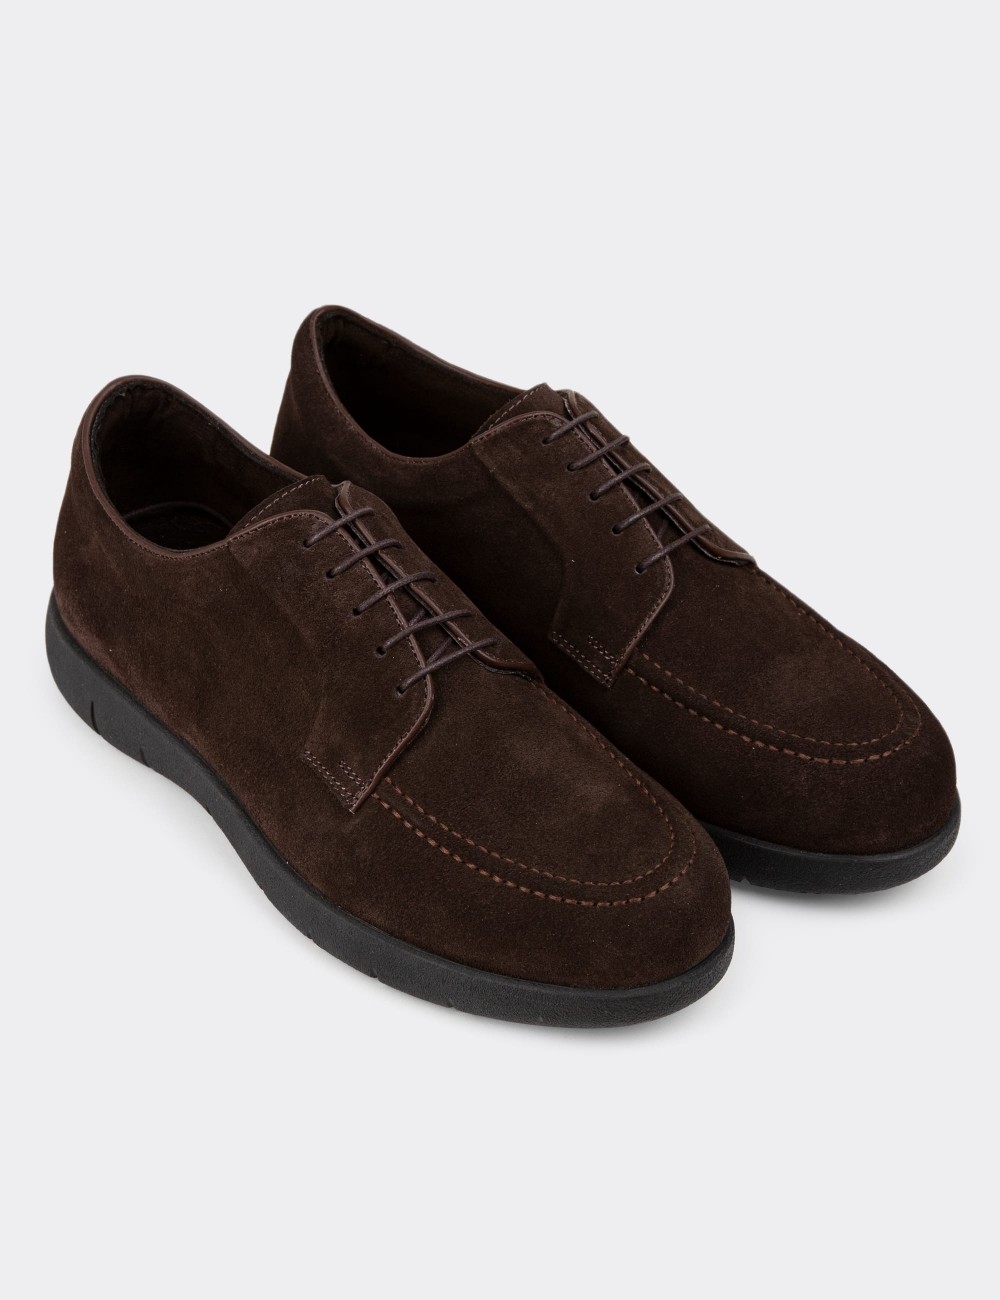 Brown Suede Leather Lace-up Shoes - 01930MKHVC02